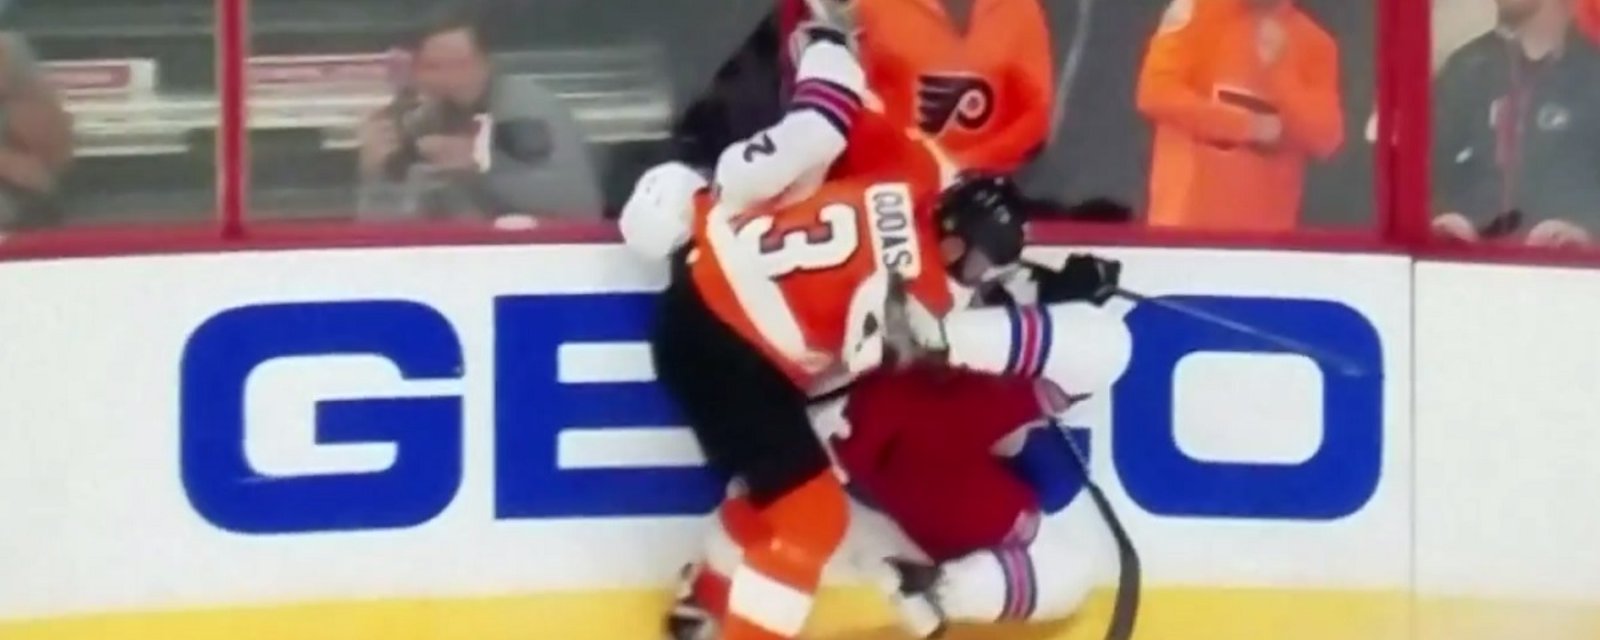 Breaking: Initial reports hint Gudas may avoid suspension for crushing hit on Jimmy Vesey.